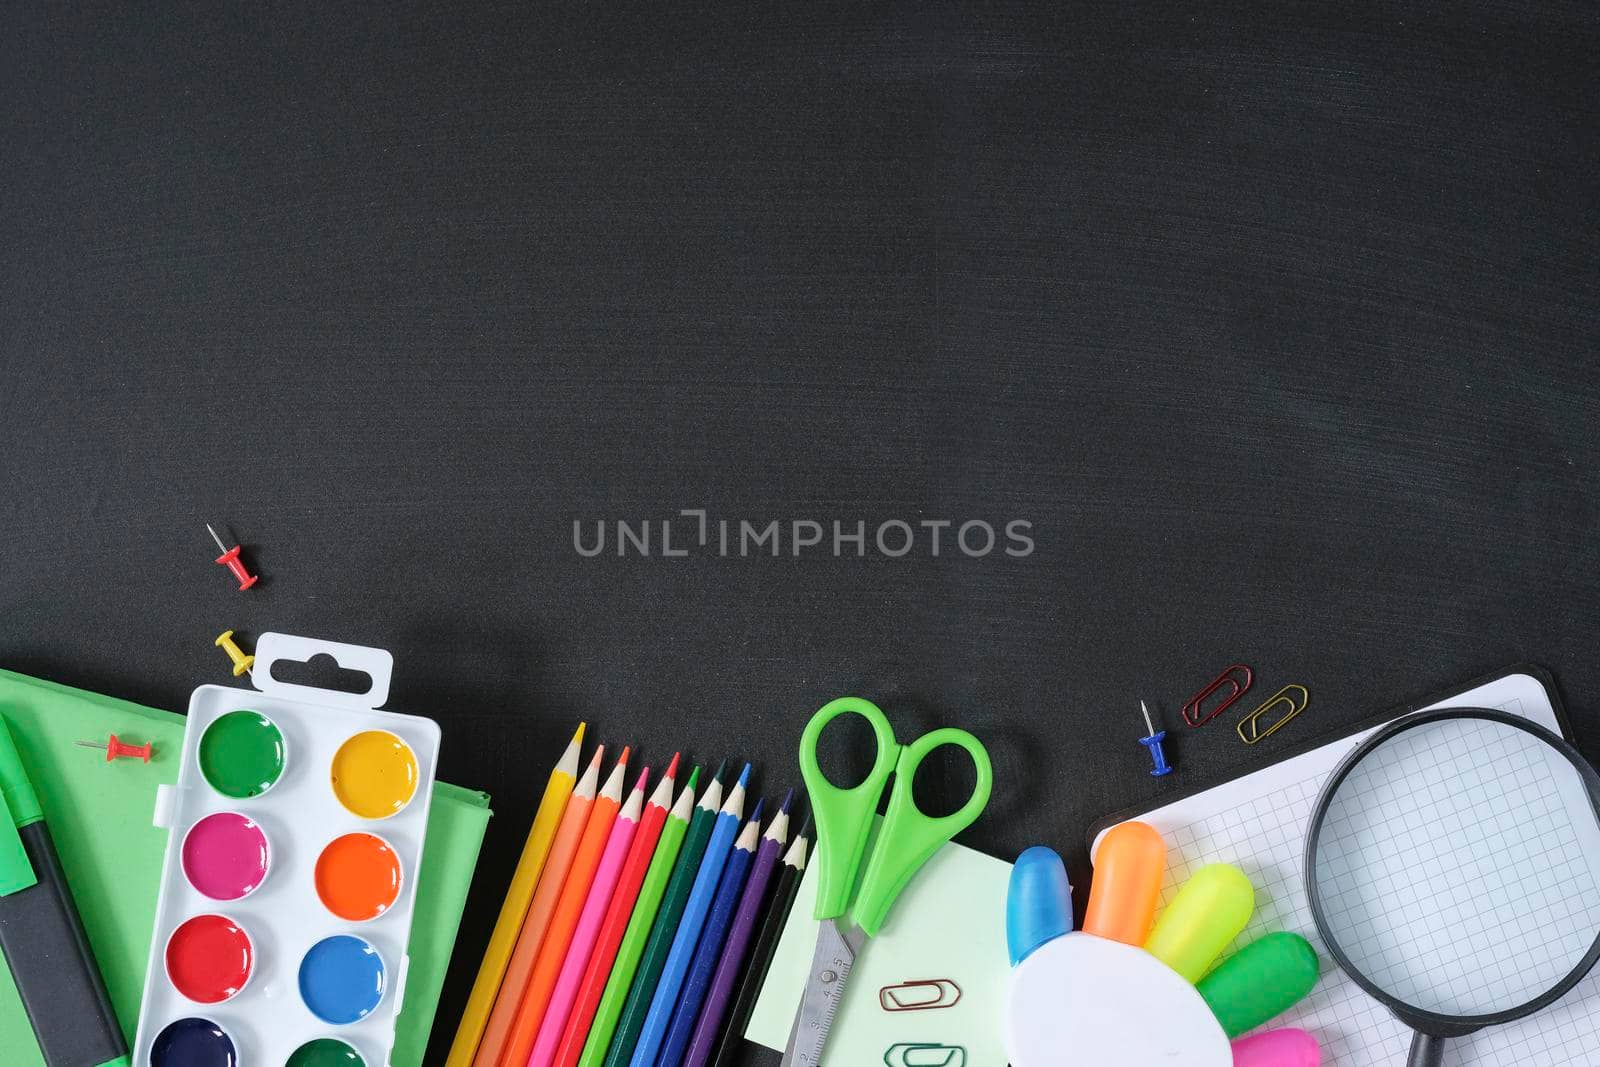 School supplies on black board background. Back to school concept